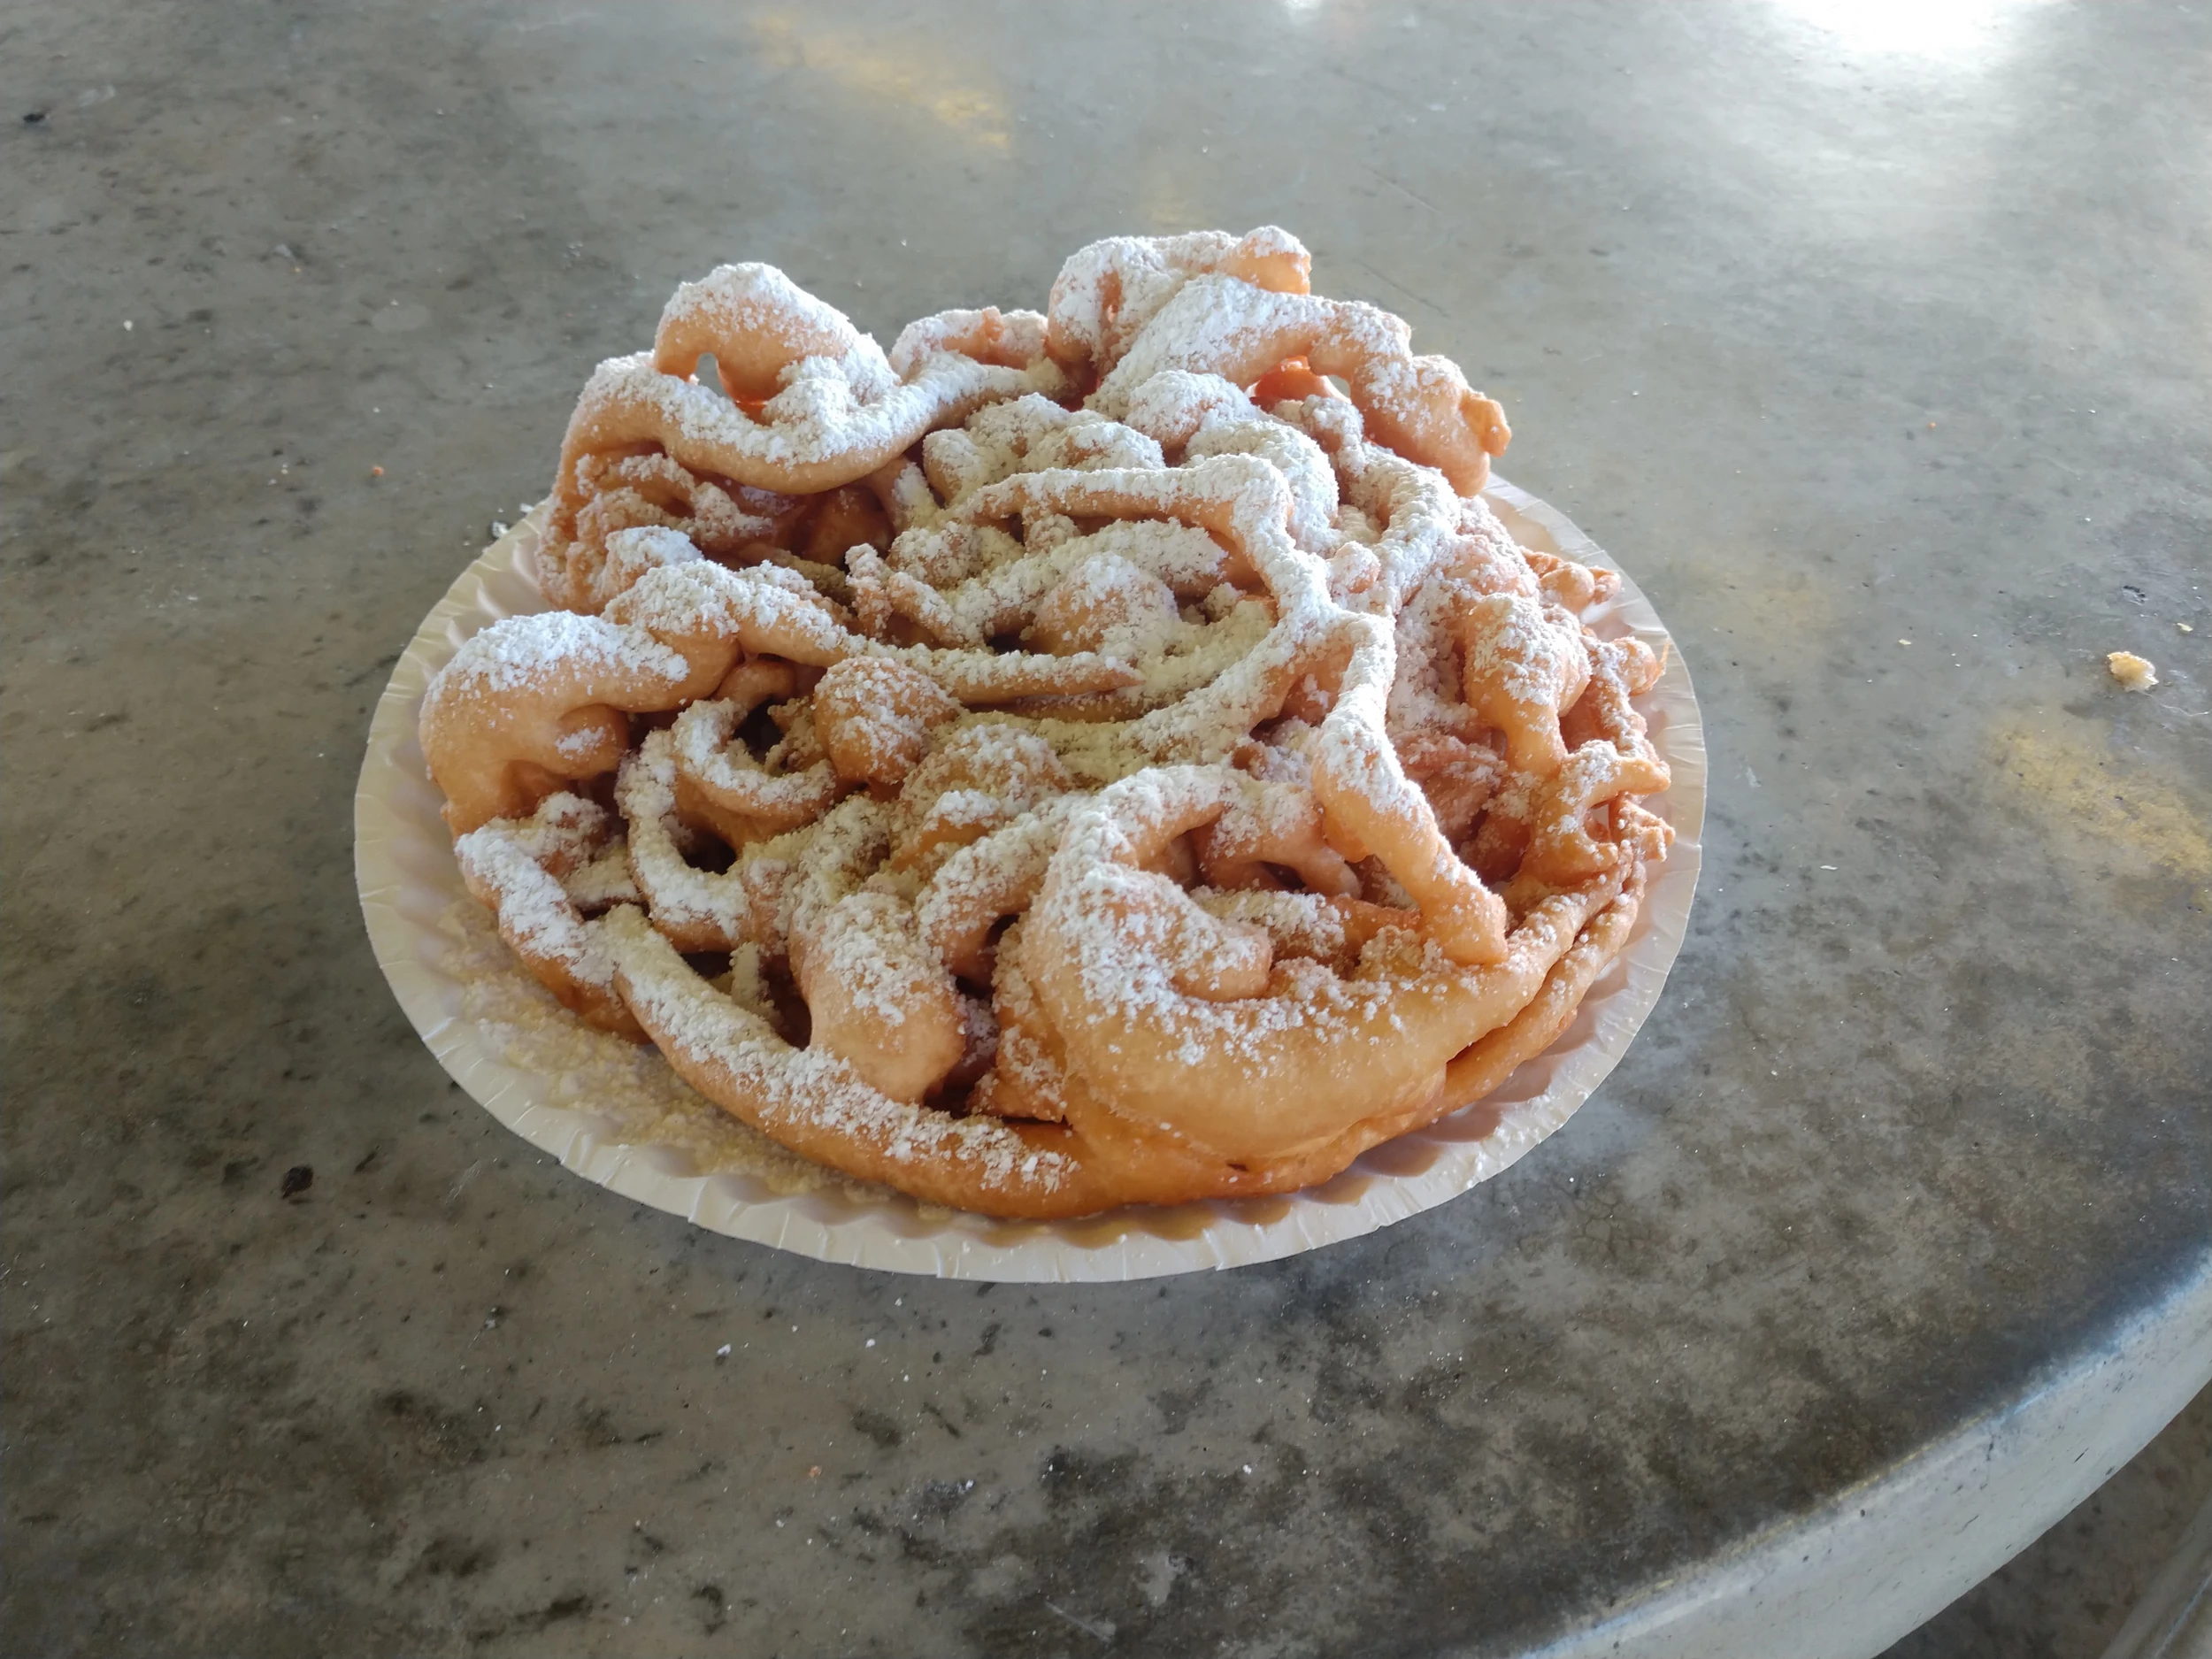 Here's the recipe for the iconic funnel cakes at Canada's Wonderland